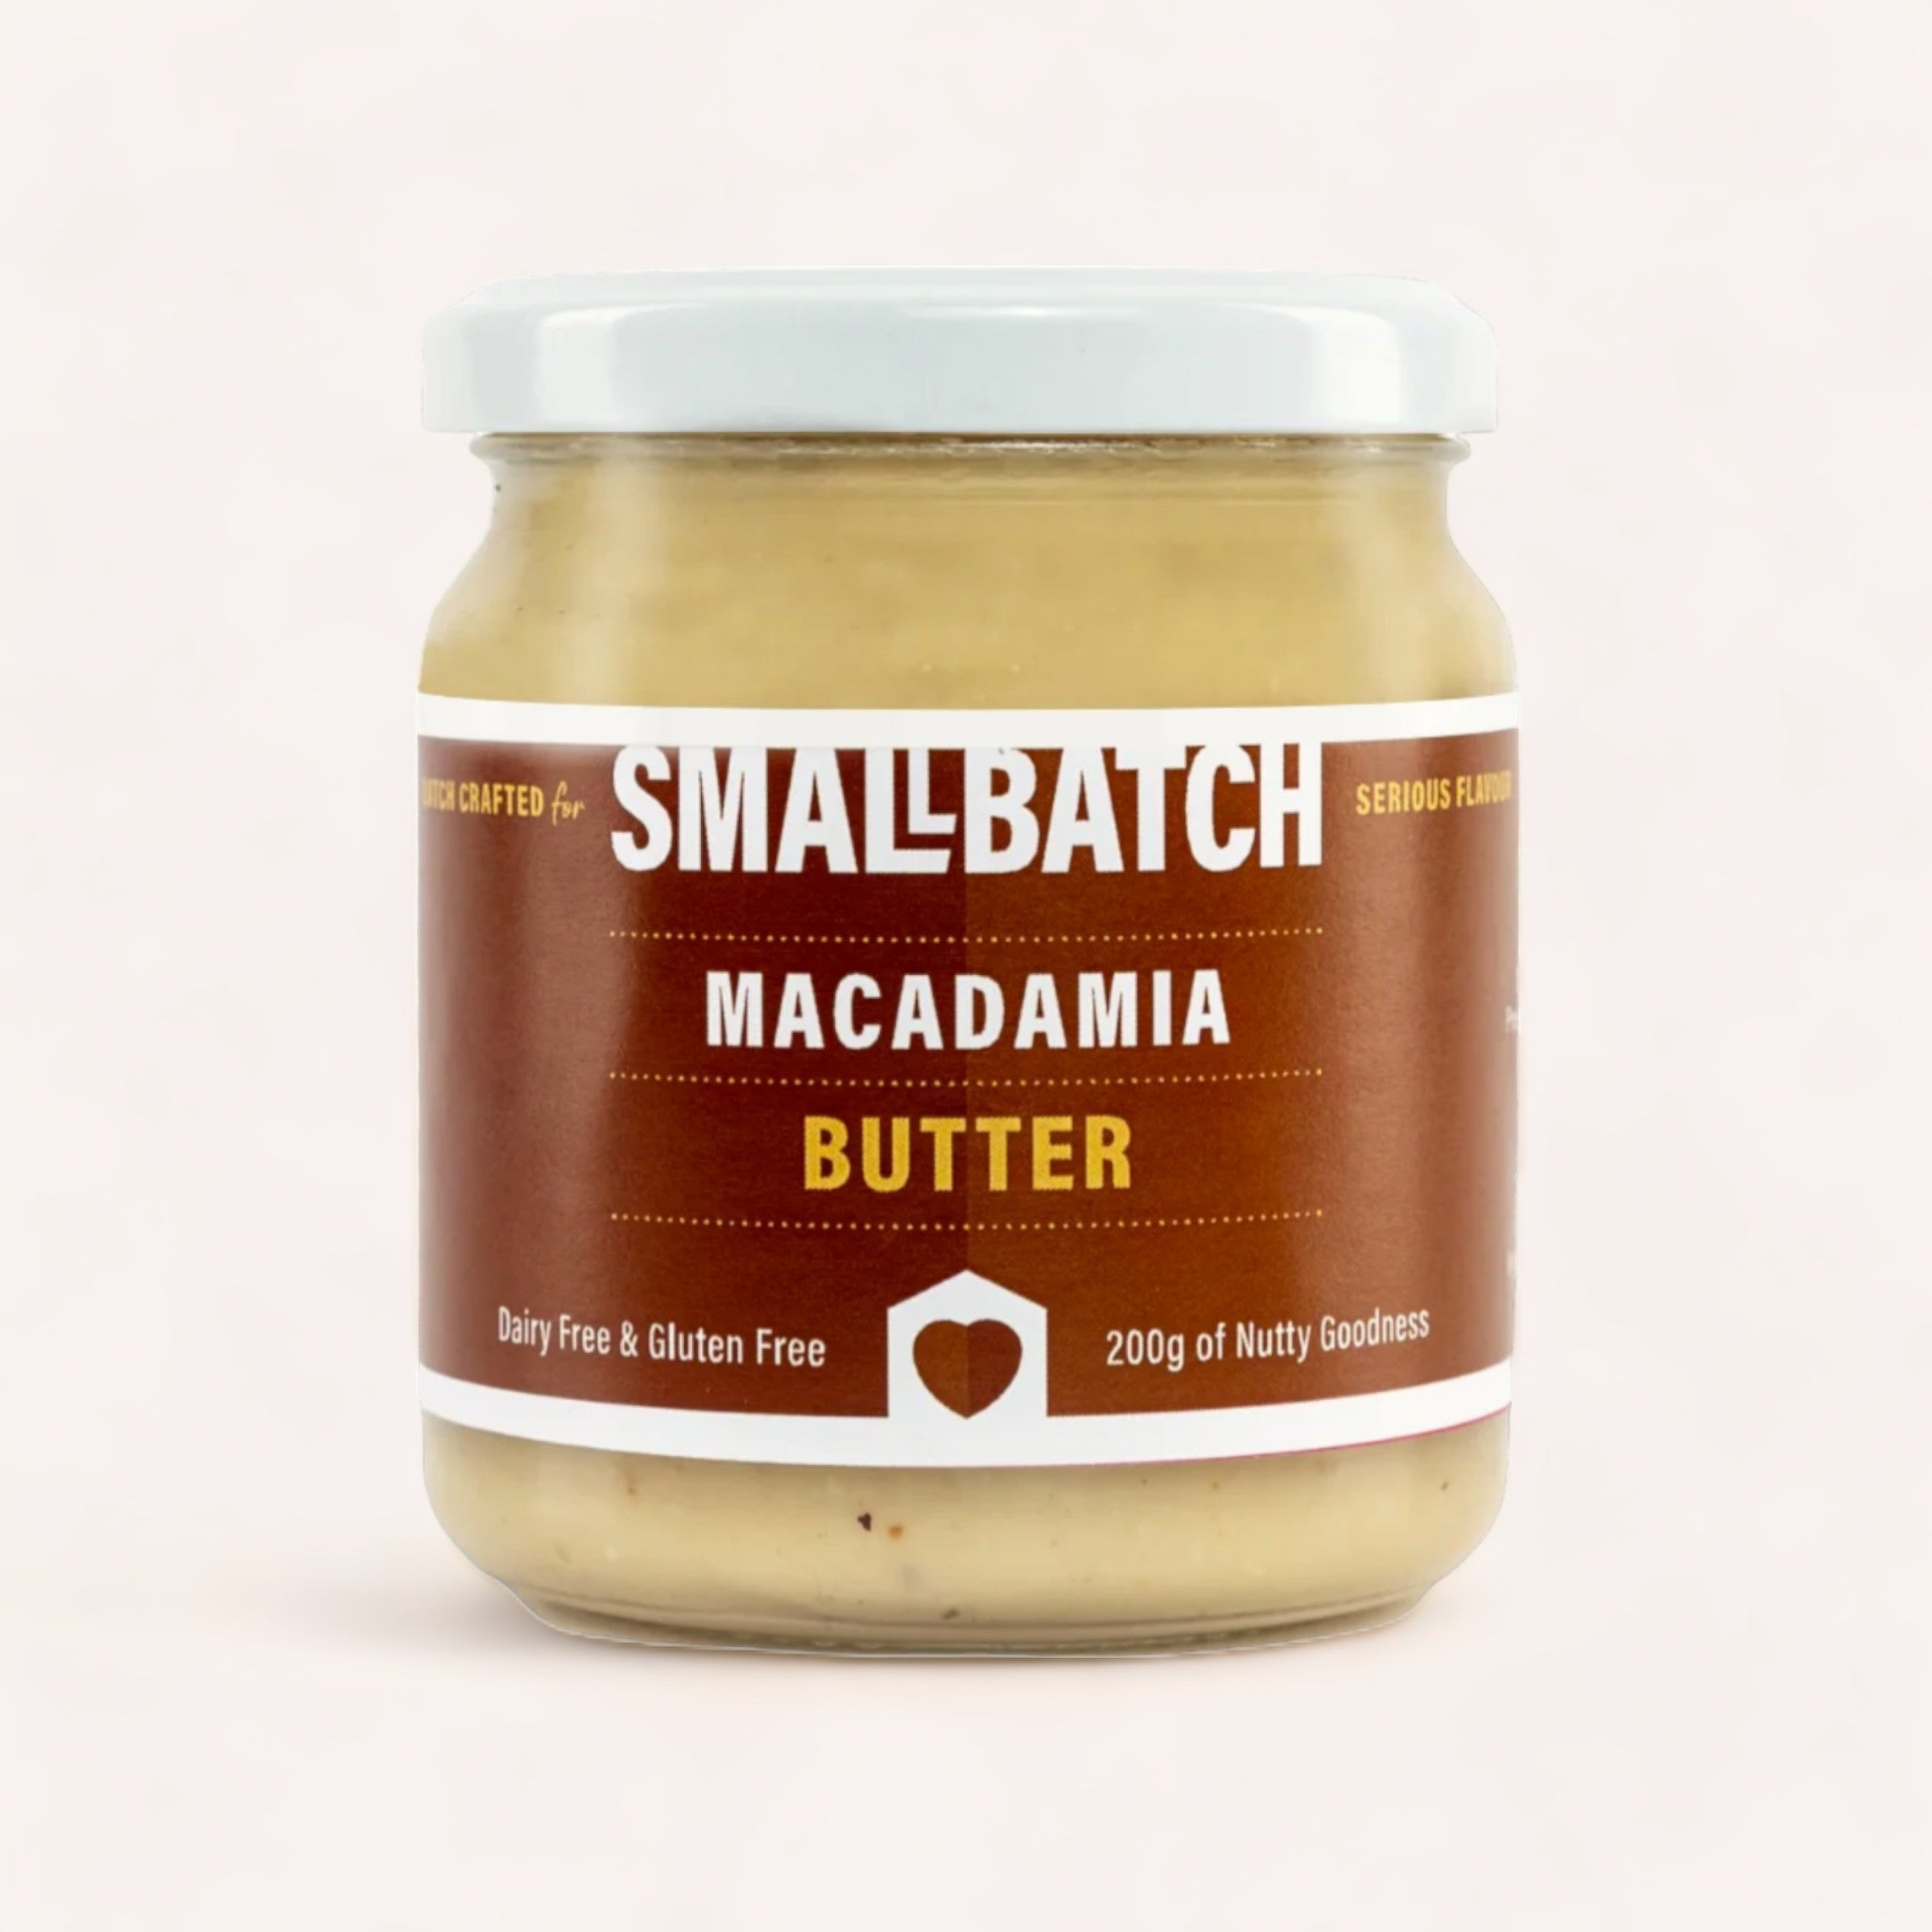 A jar of Macadamia Butter by Smallbatch made in Mount Maunganui against a neutral background, highlighting its dairy-free and gluten-free qualities with a tagline that reads "200g of nutty.